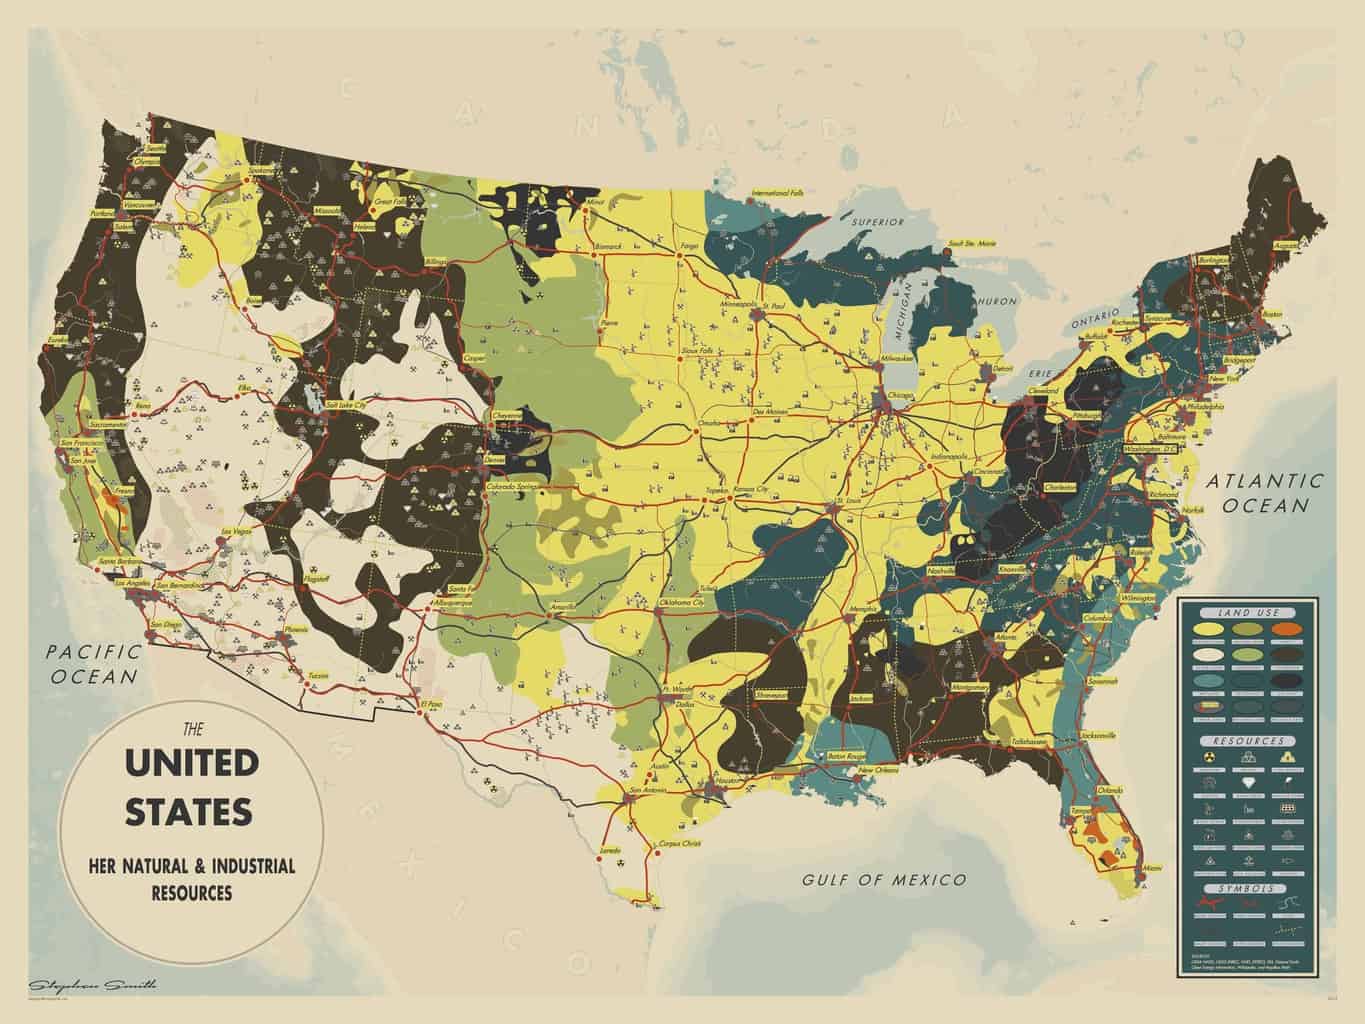 United States Resource Map MapsmithThe United States: Her Natural and Industrial Resources 